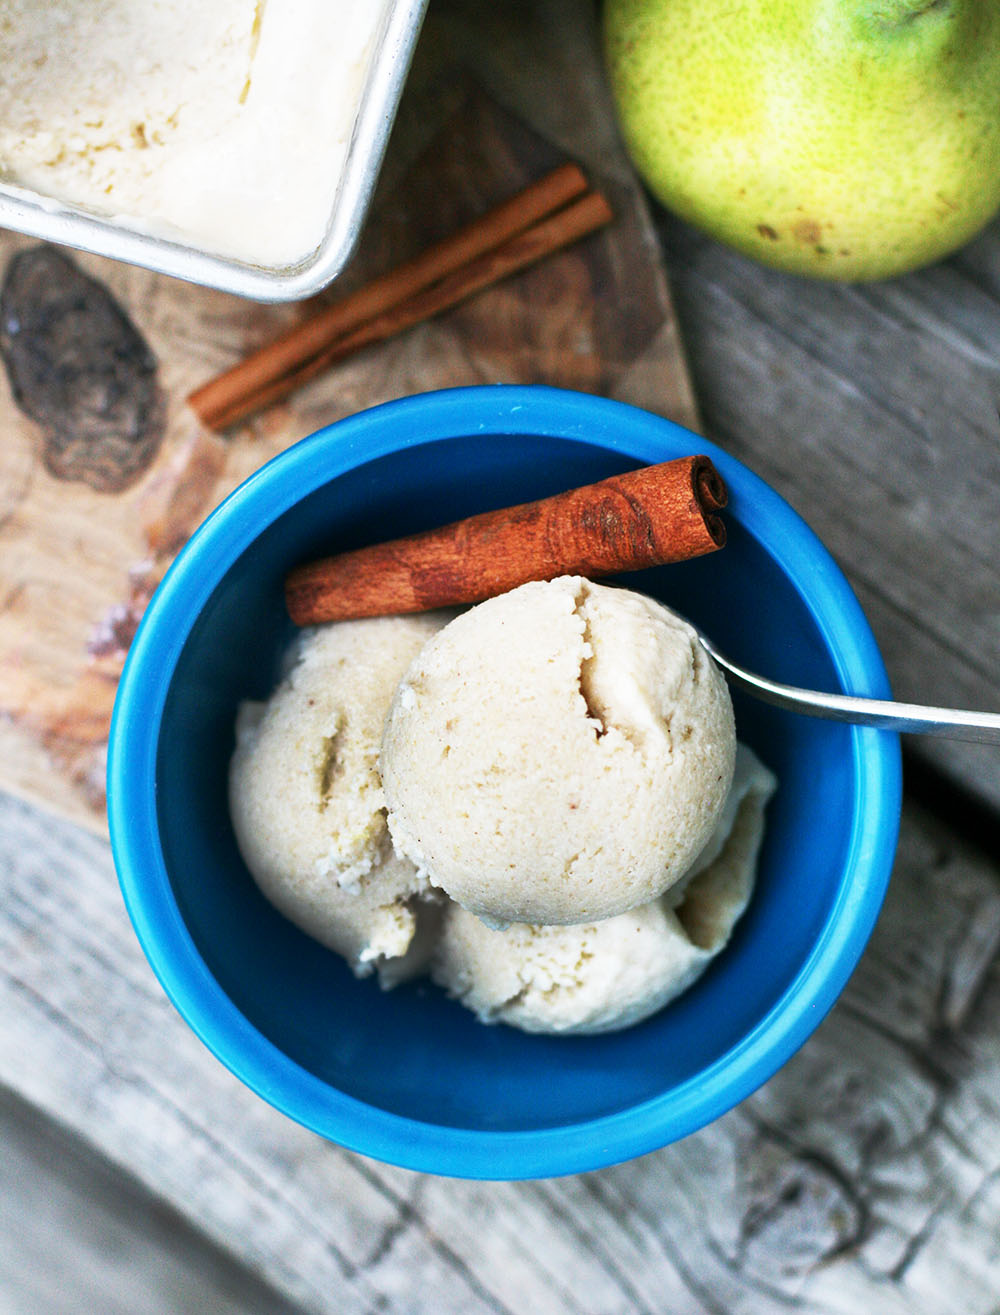 How to make pear ice cream: You don't need an ice cream maker to make this delicious dessert at home!